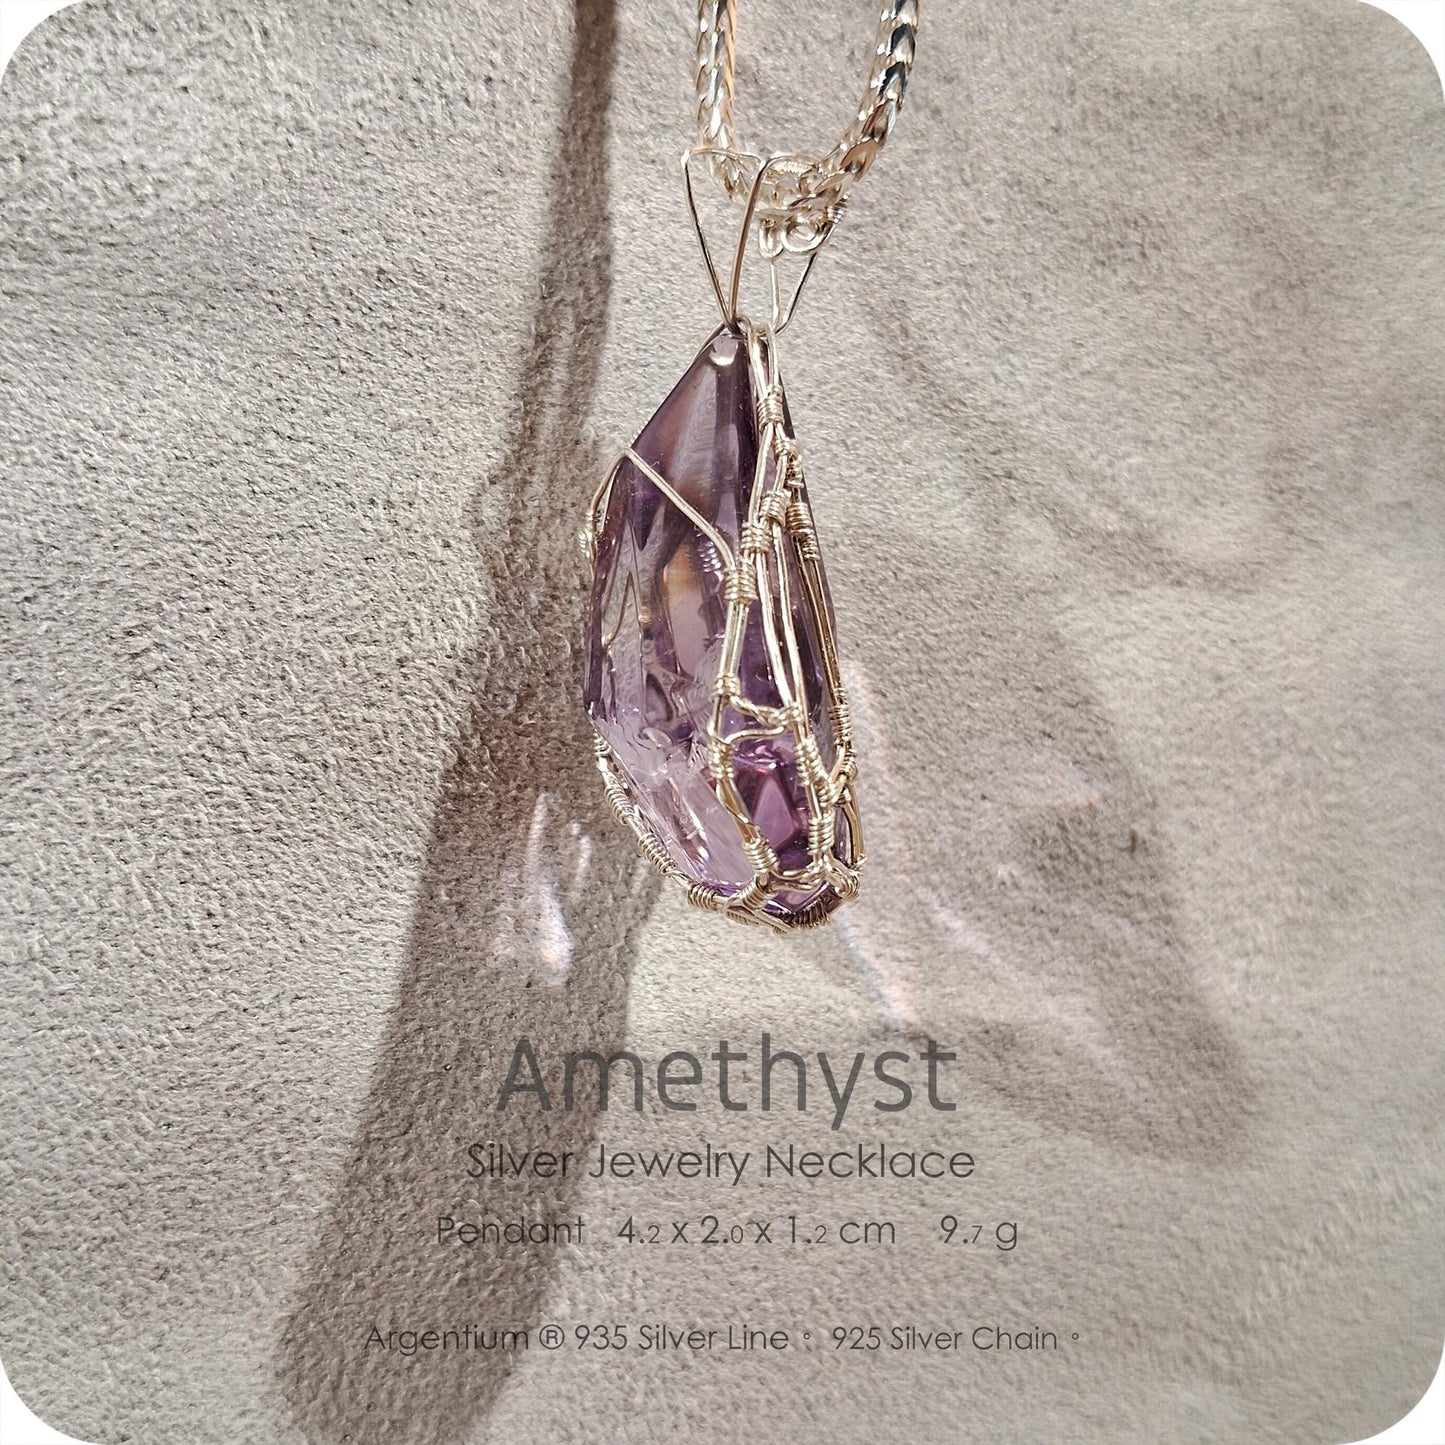 Amethyst Silver Jewelry Necklace - H233